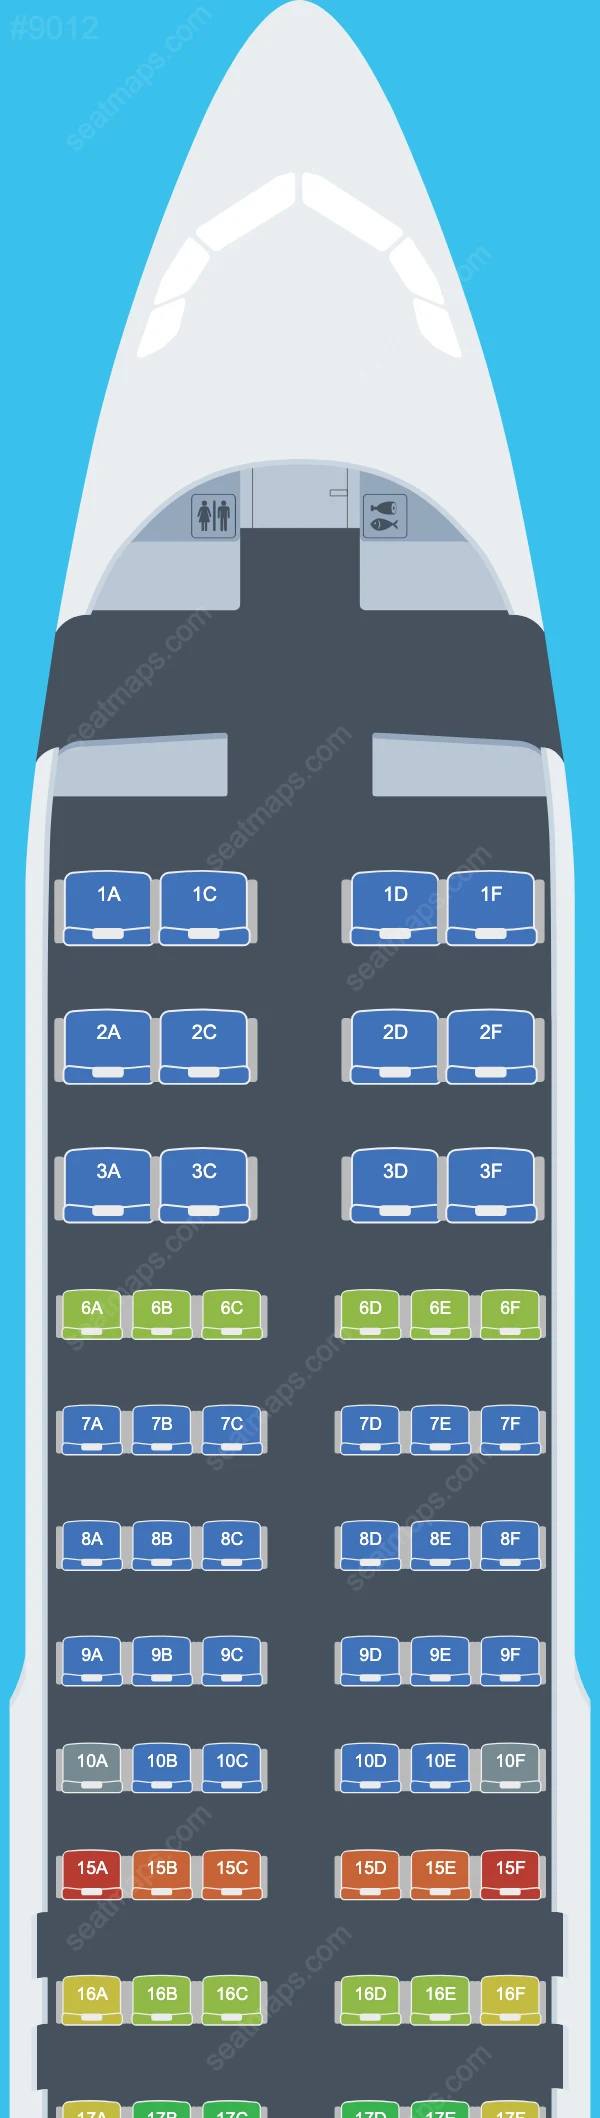 Alaska Airlines Airbus A320 Seat Maps A320-200 V.2